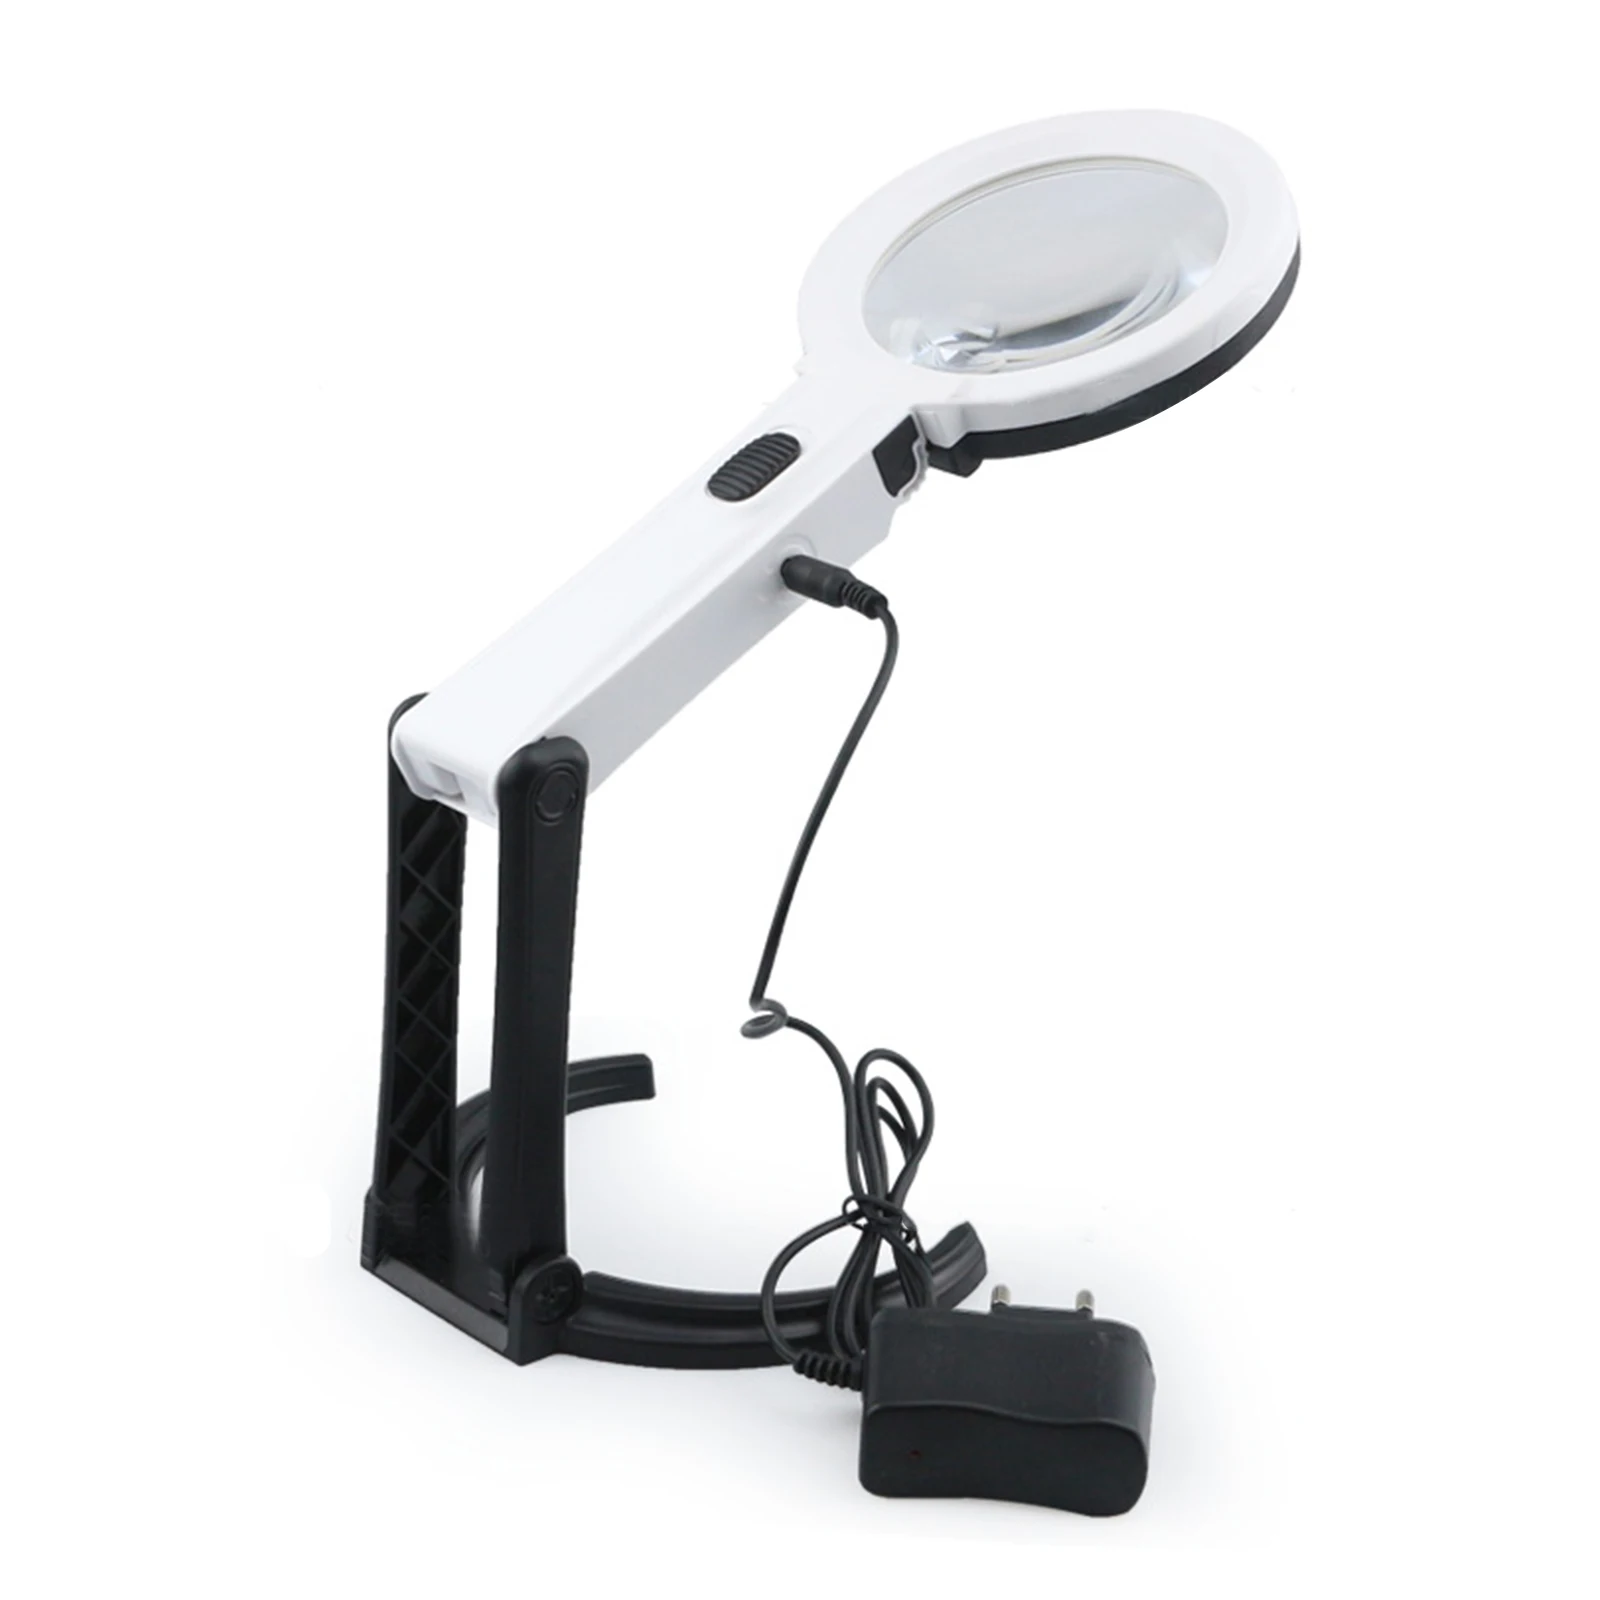 

REXLIS Desk LED Magnifier 2.5X 8X LED Lighted Magnifying Glass Folding Handheld Magnifier With Light For Reading US/EU Plug